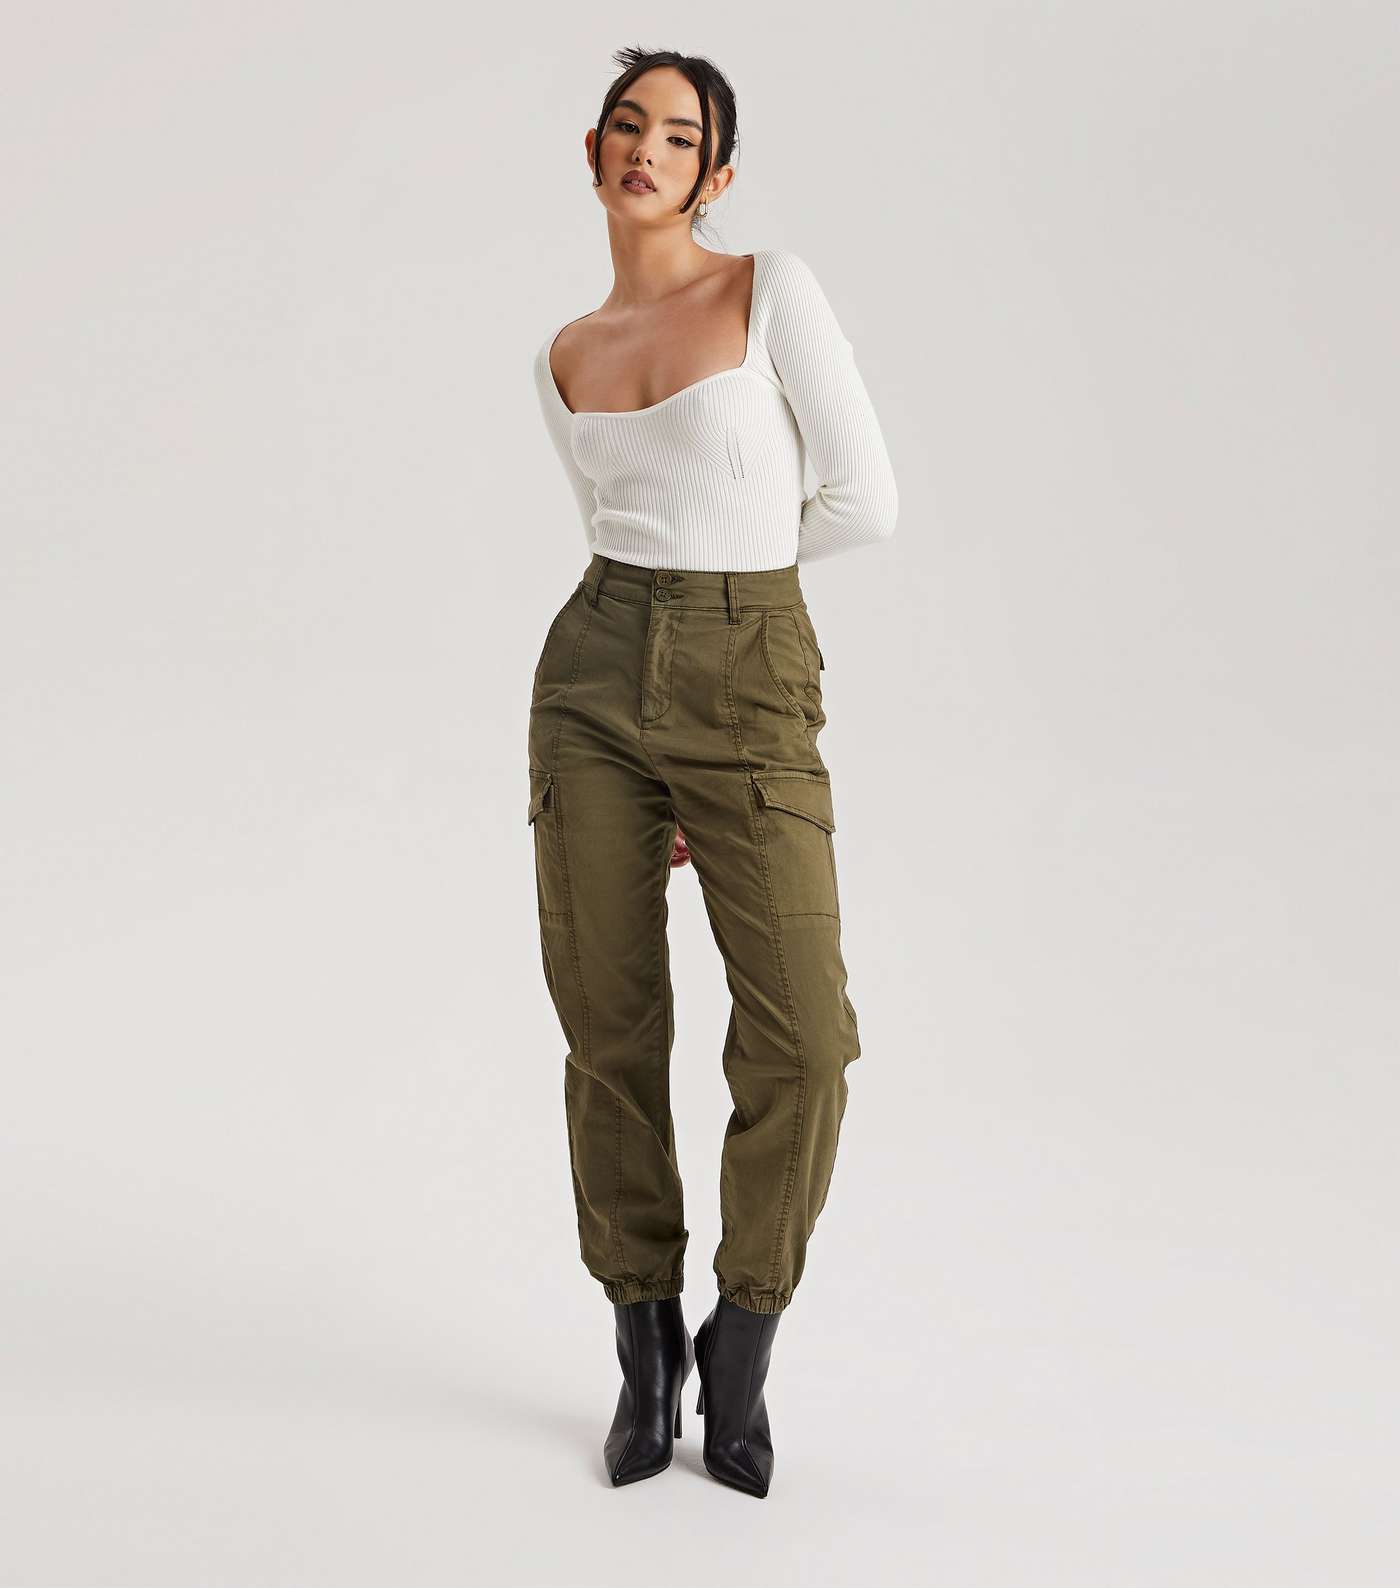 Urban Bliss Olive Cuffed Cargo Trousers Image 2